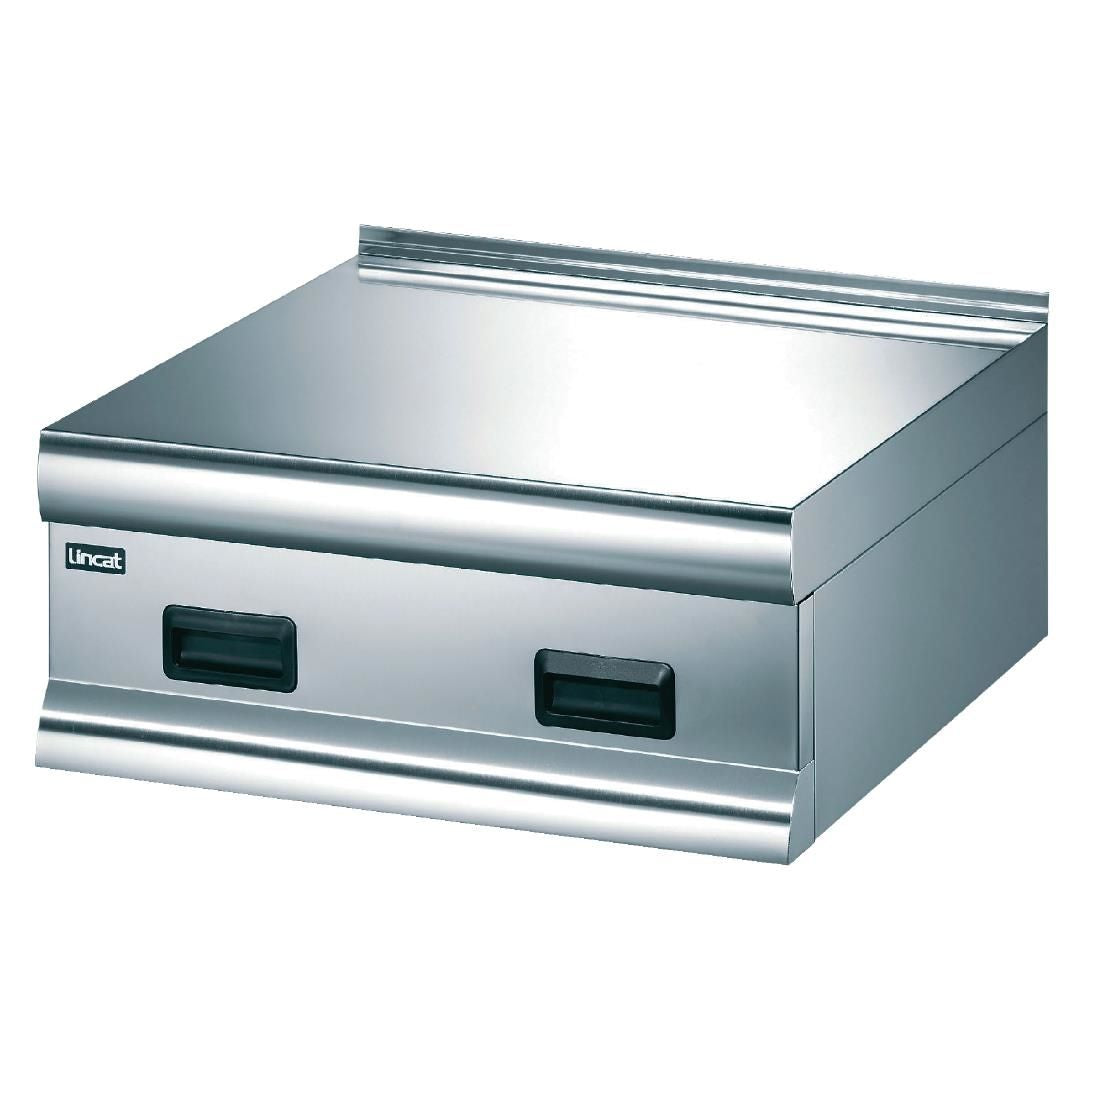 E573 Lincat Silverlink 600 Worktop With Drawer JD Catering Equipment Solutions Ltd